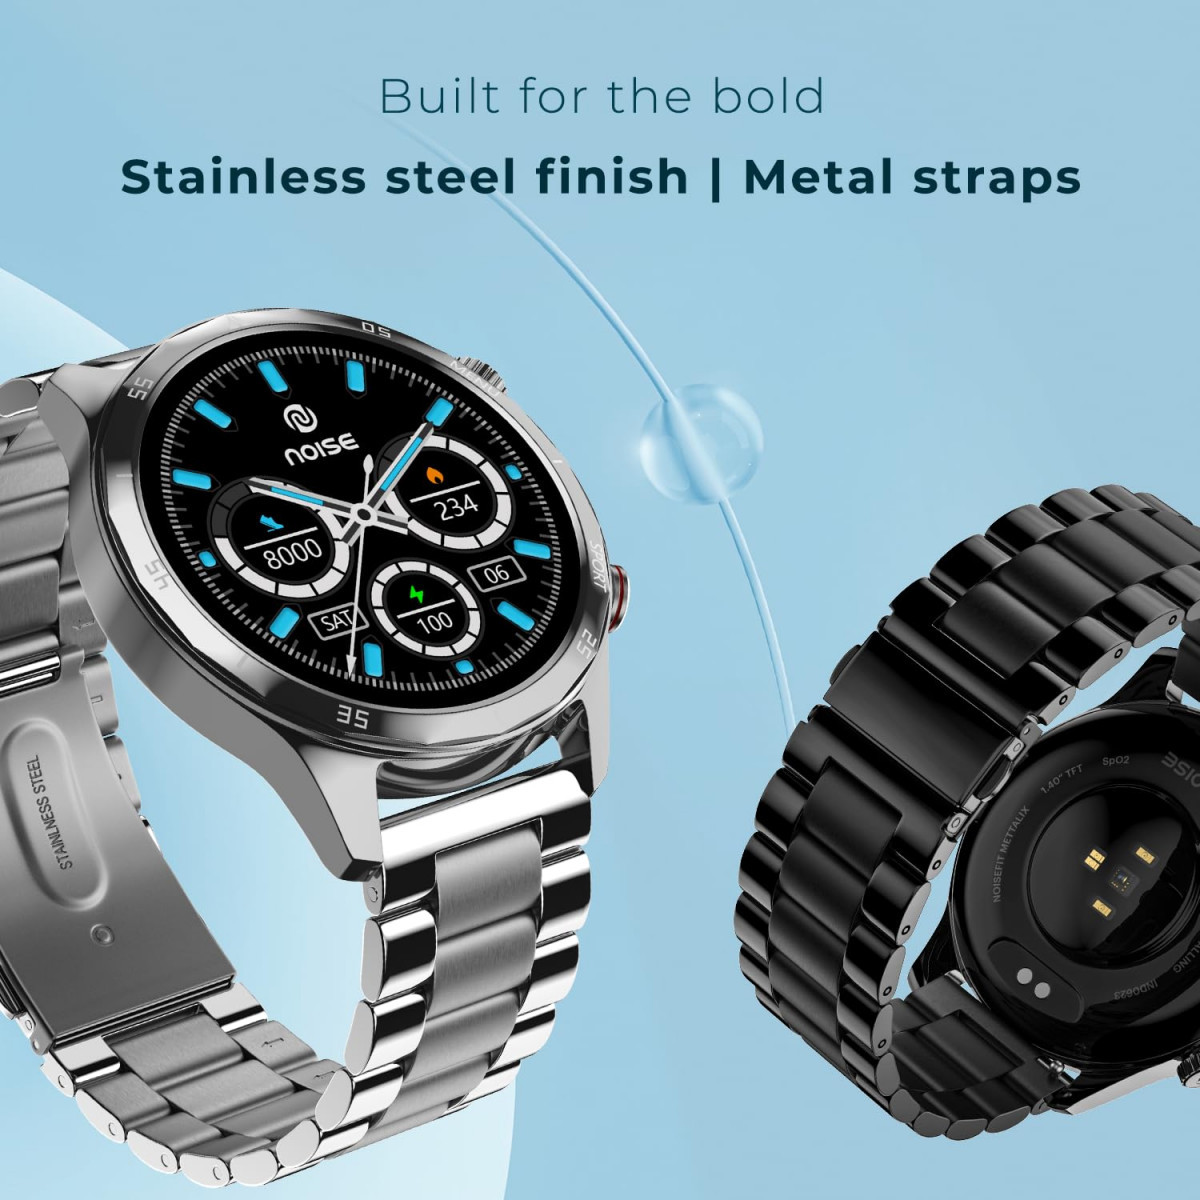 Noise Mettalix 14 Display Bluetooth Calling Smart Watch with Metallic Strap Stainless Steel Finish Functional Crown 7-Day Battery Elite Black